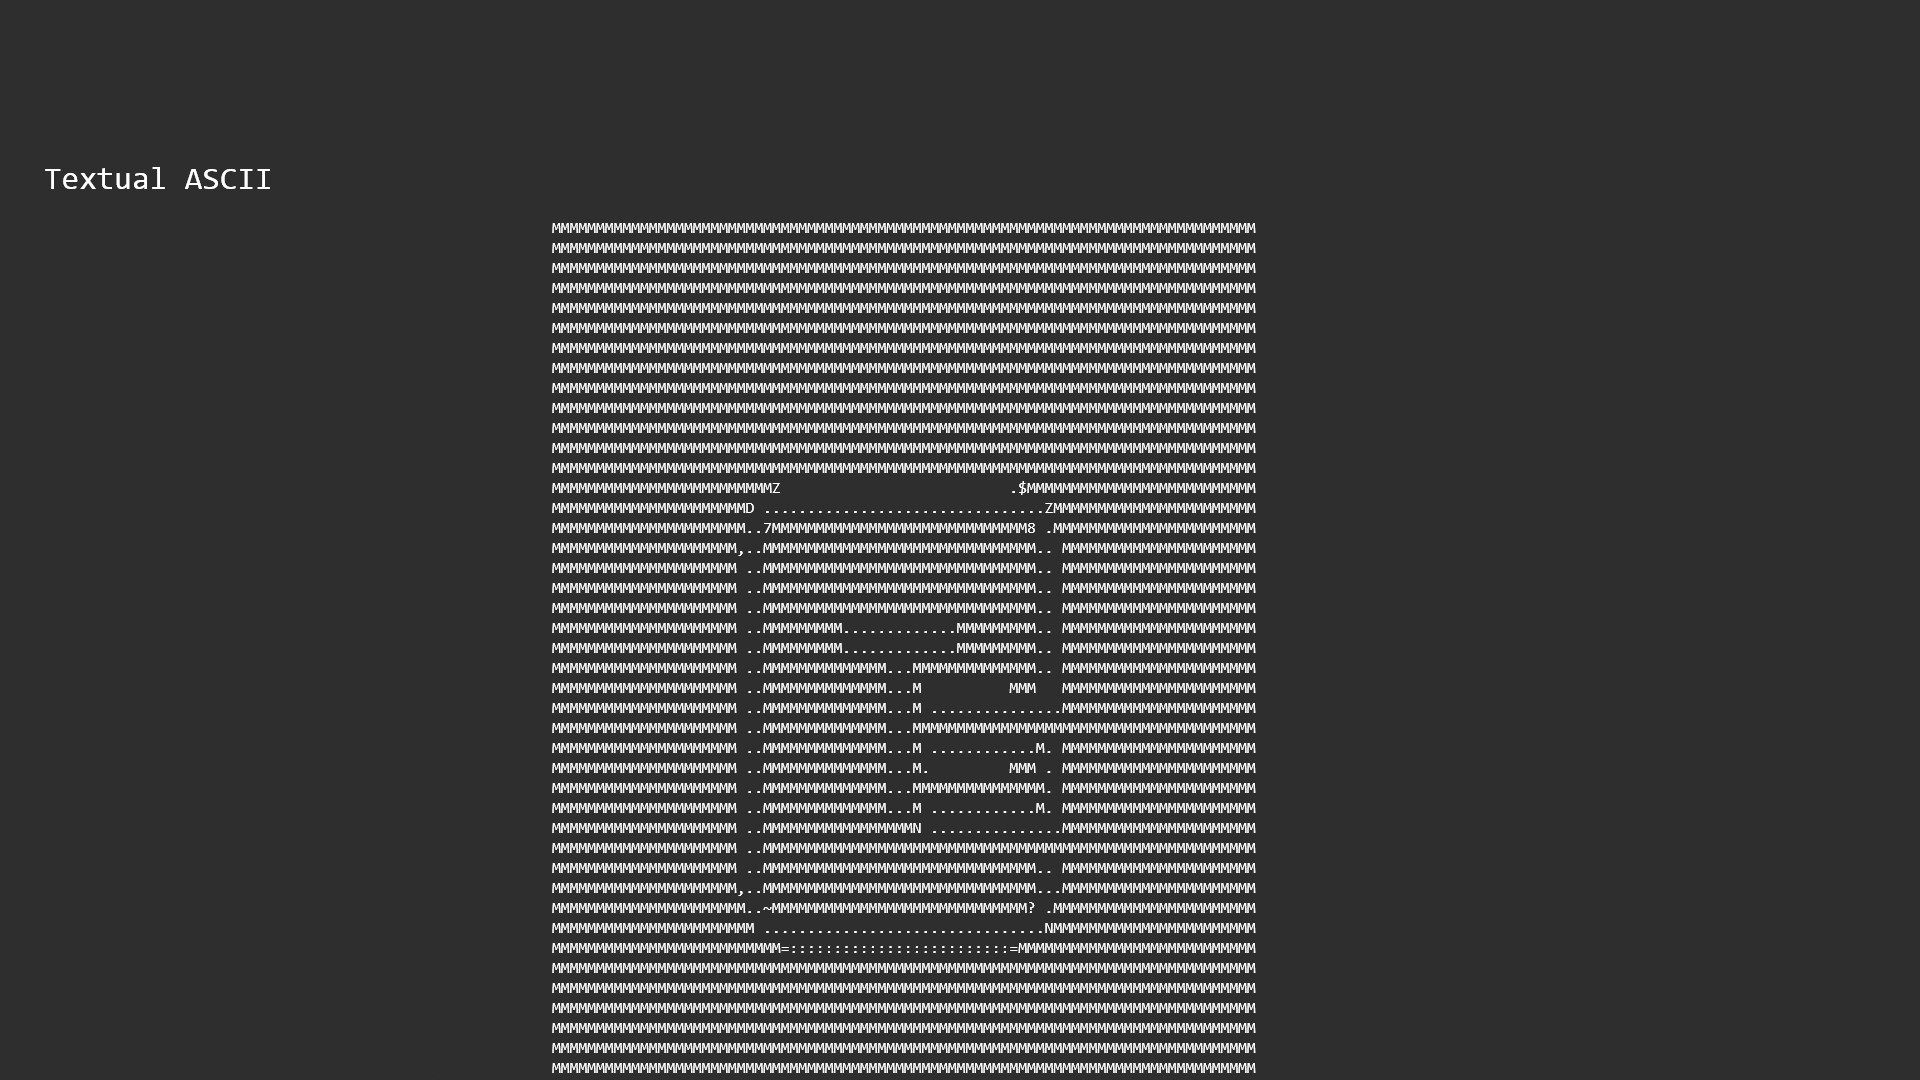 View normal text documents but also ASCII art.